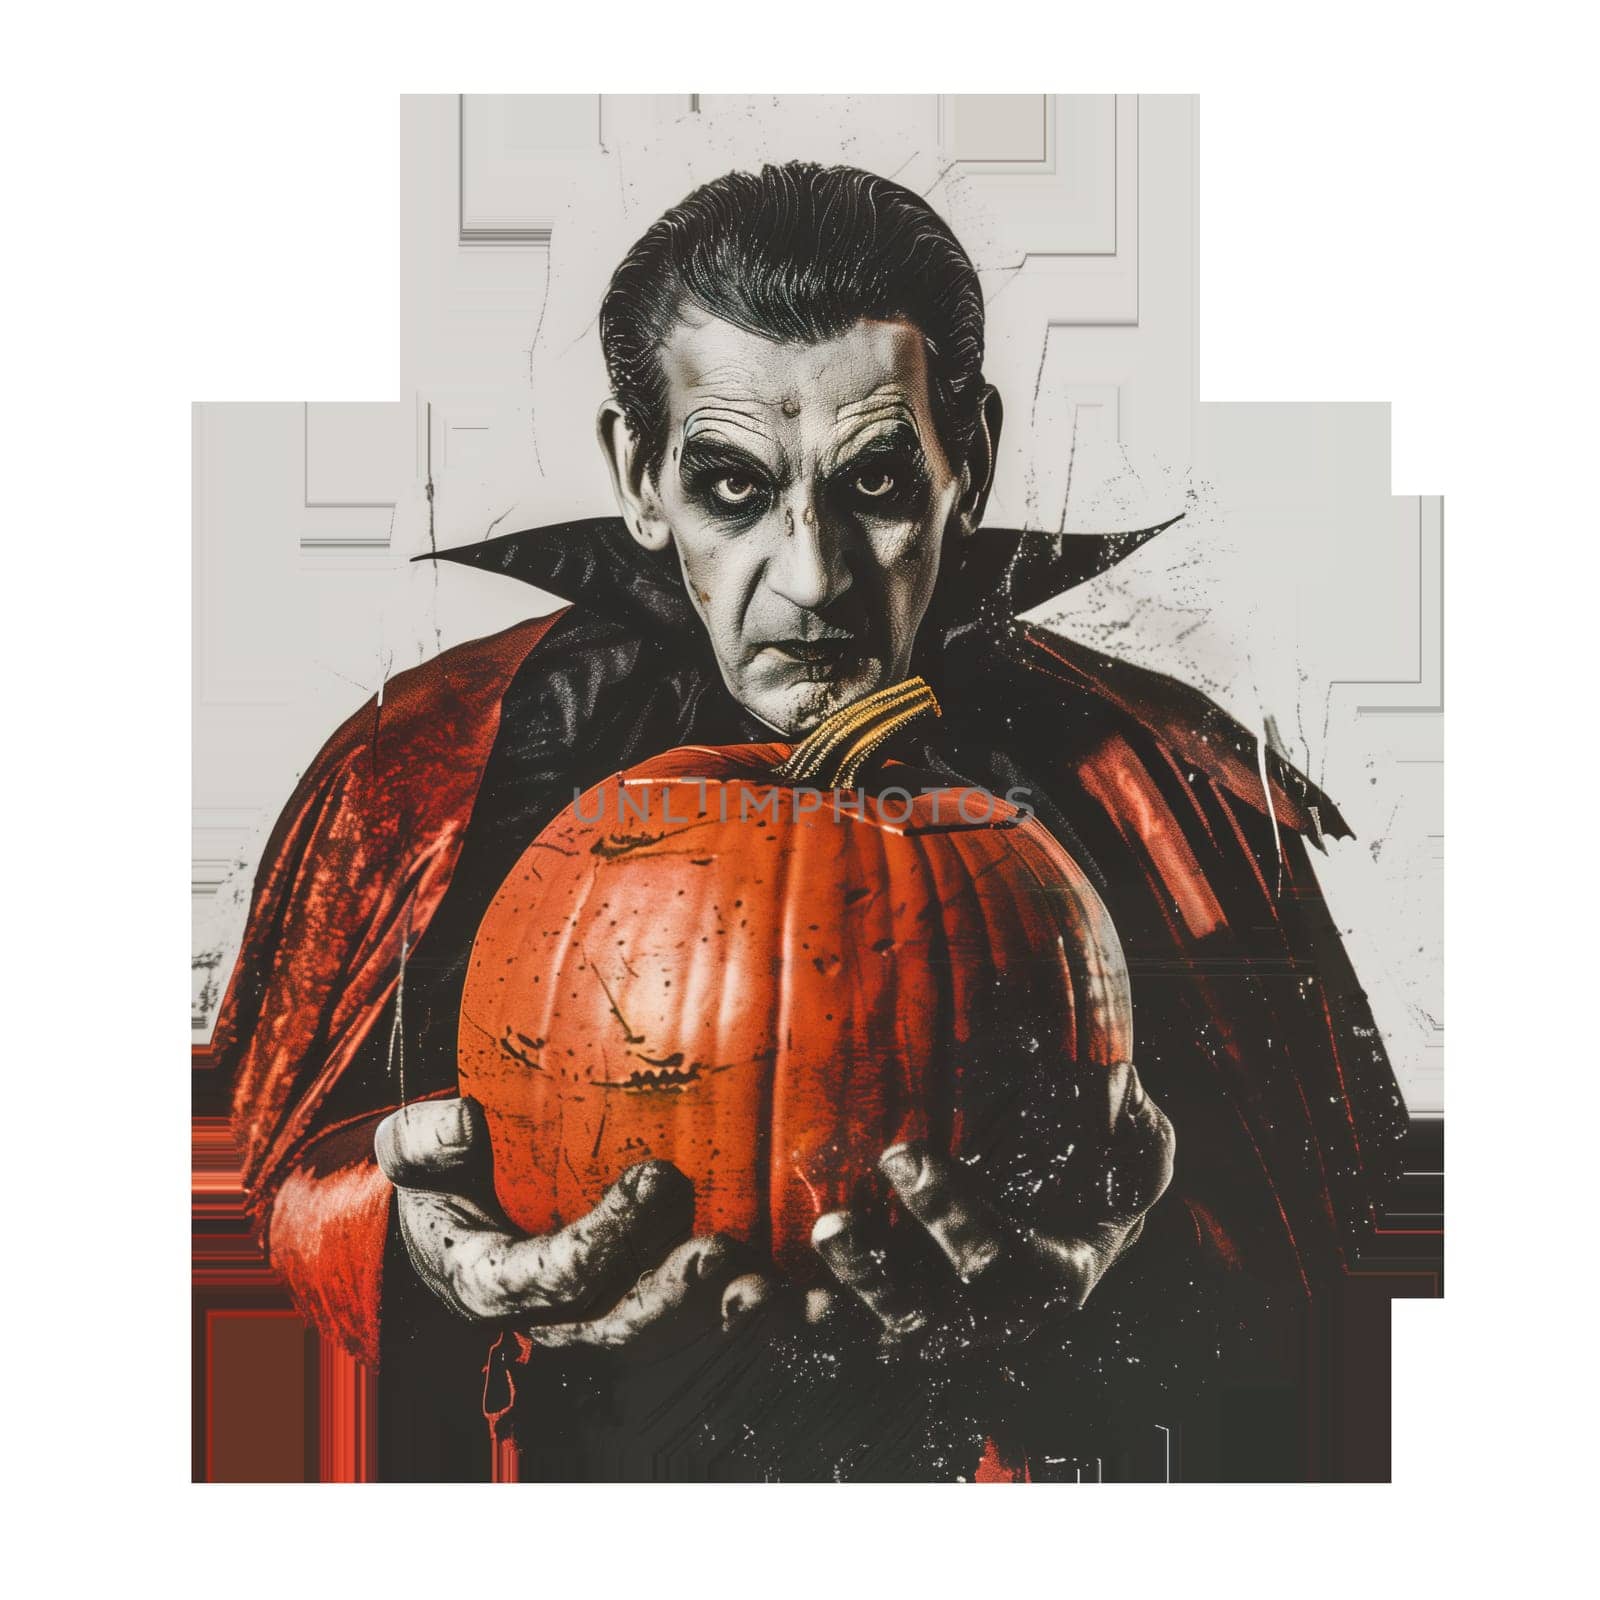 Cut out photo of halloween vampire with pumpkin by Dustick